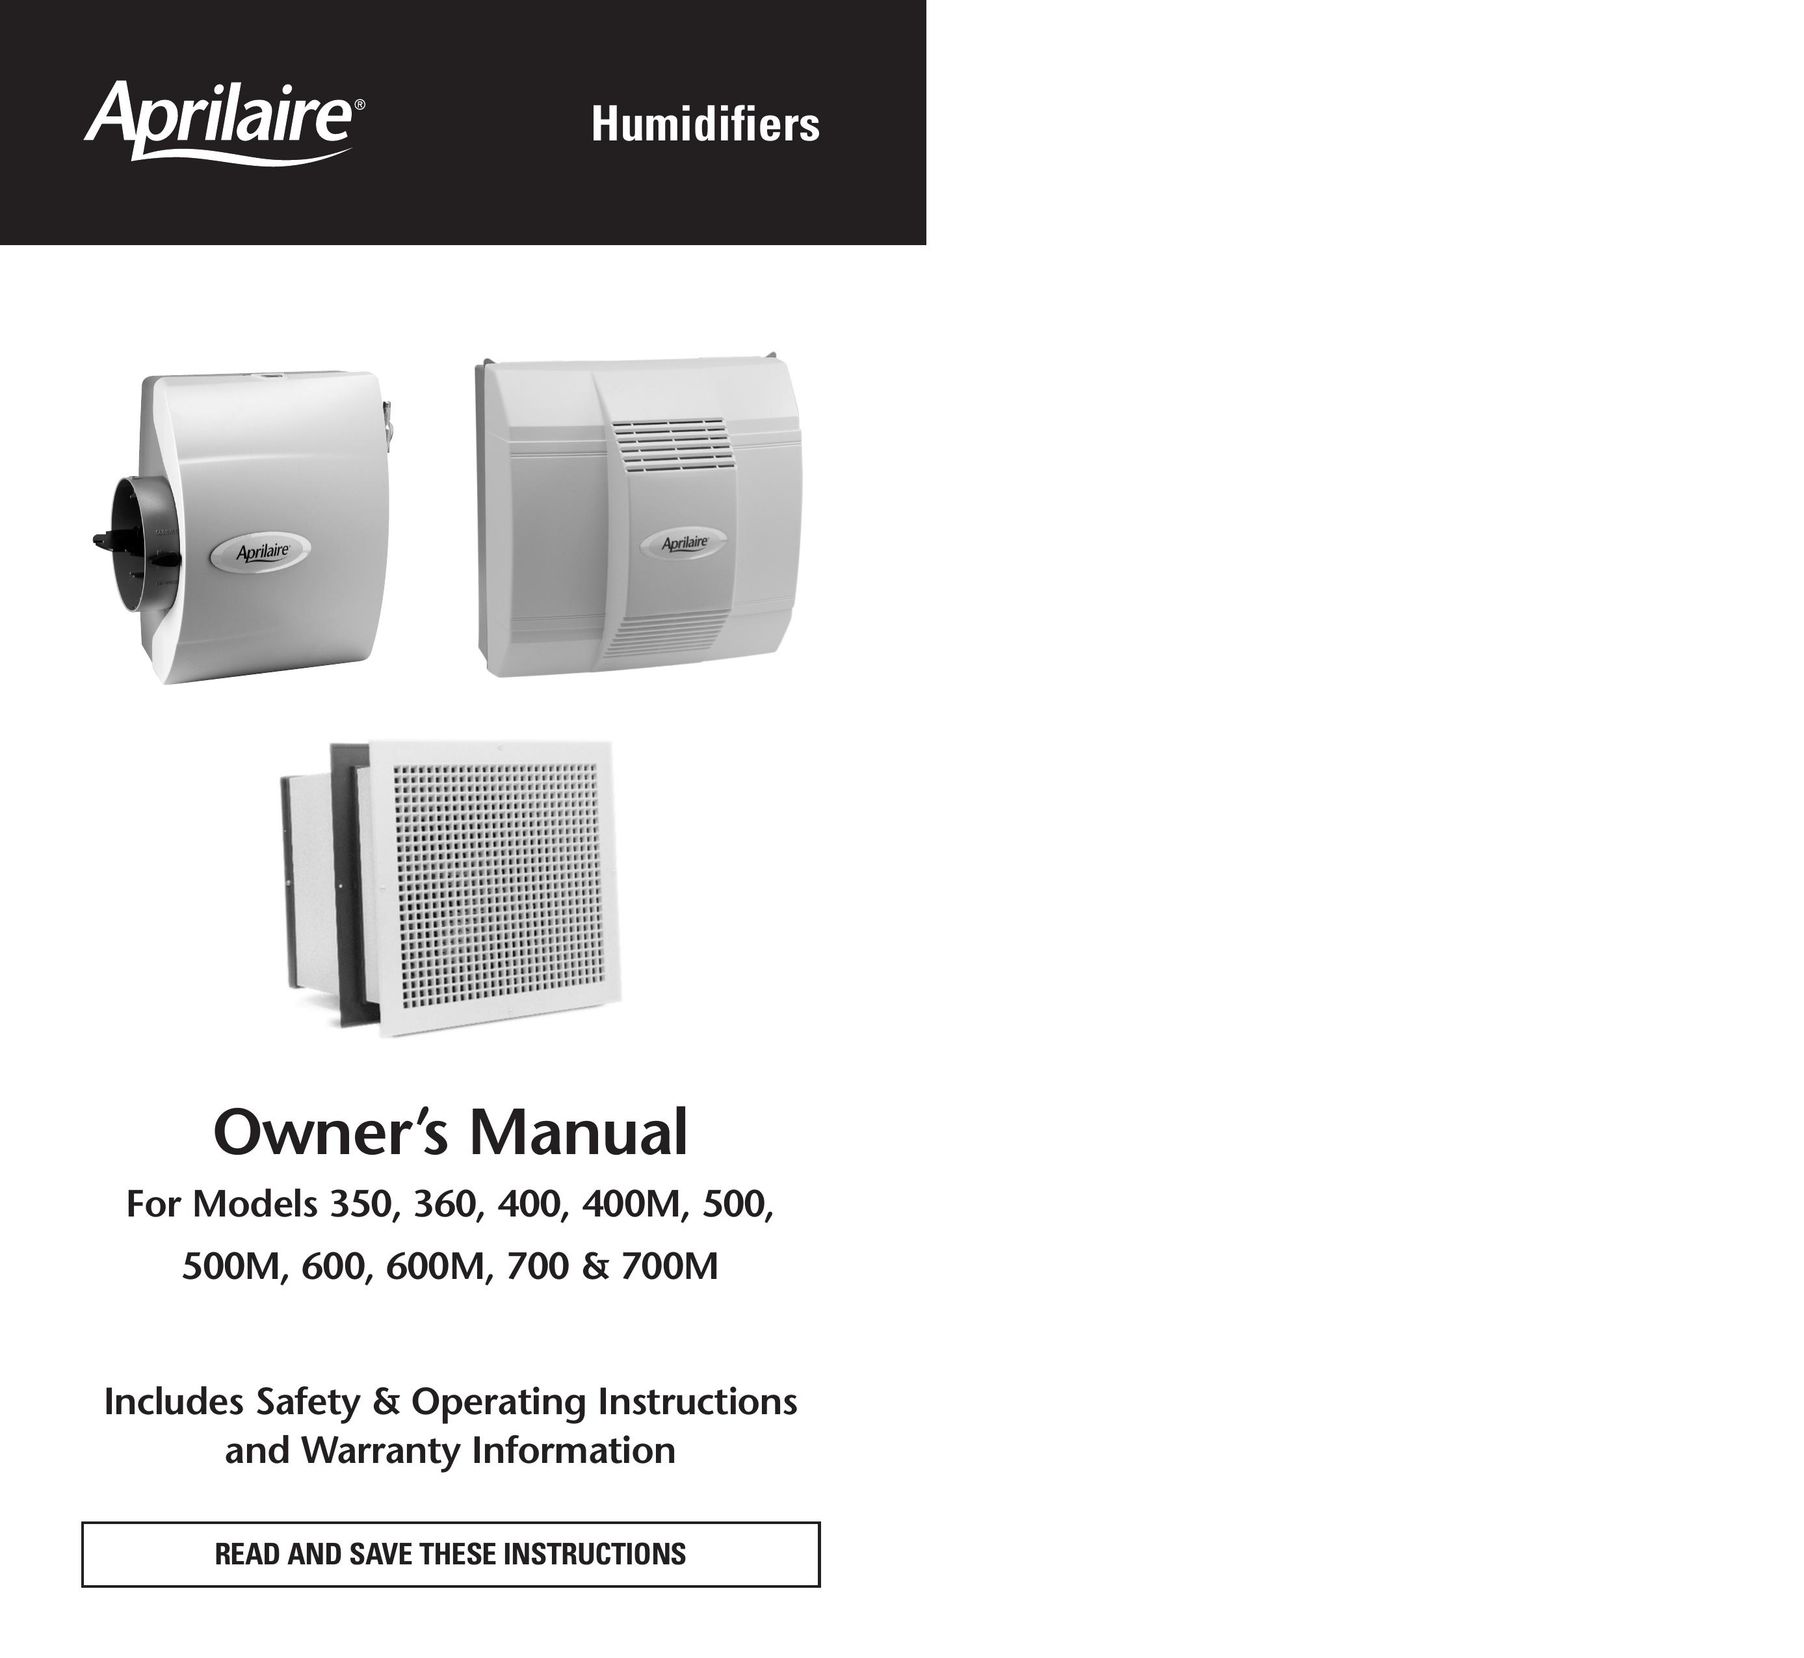 Aprilaire 400m Humidifier User Manual